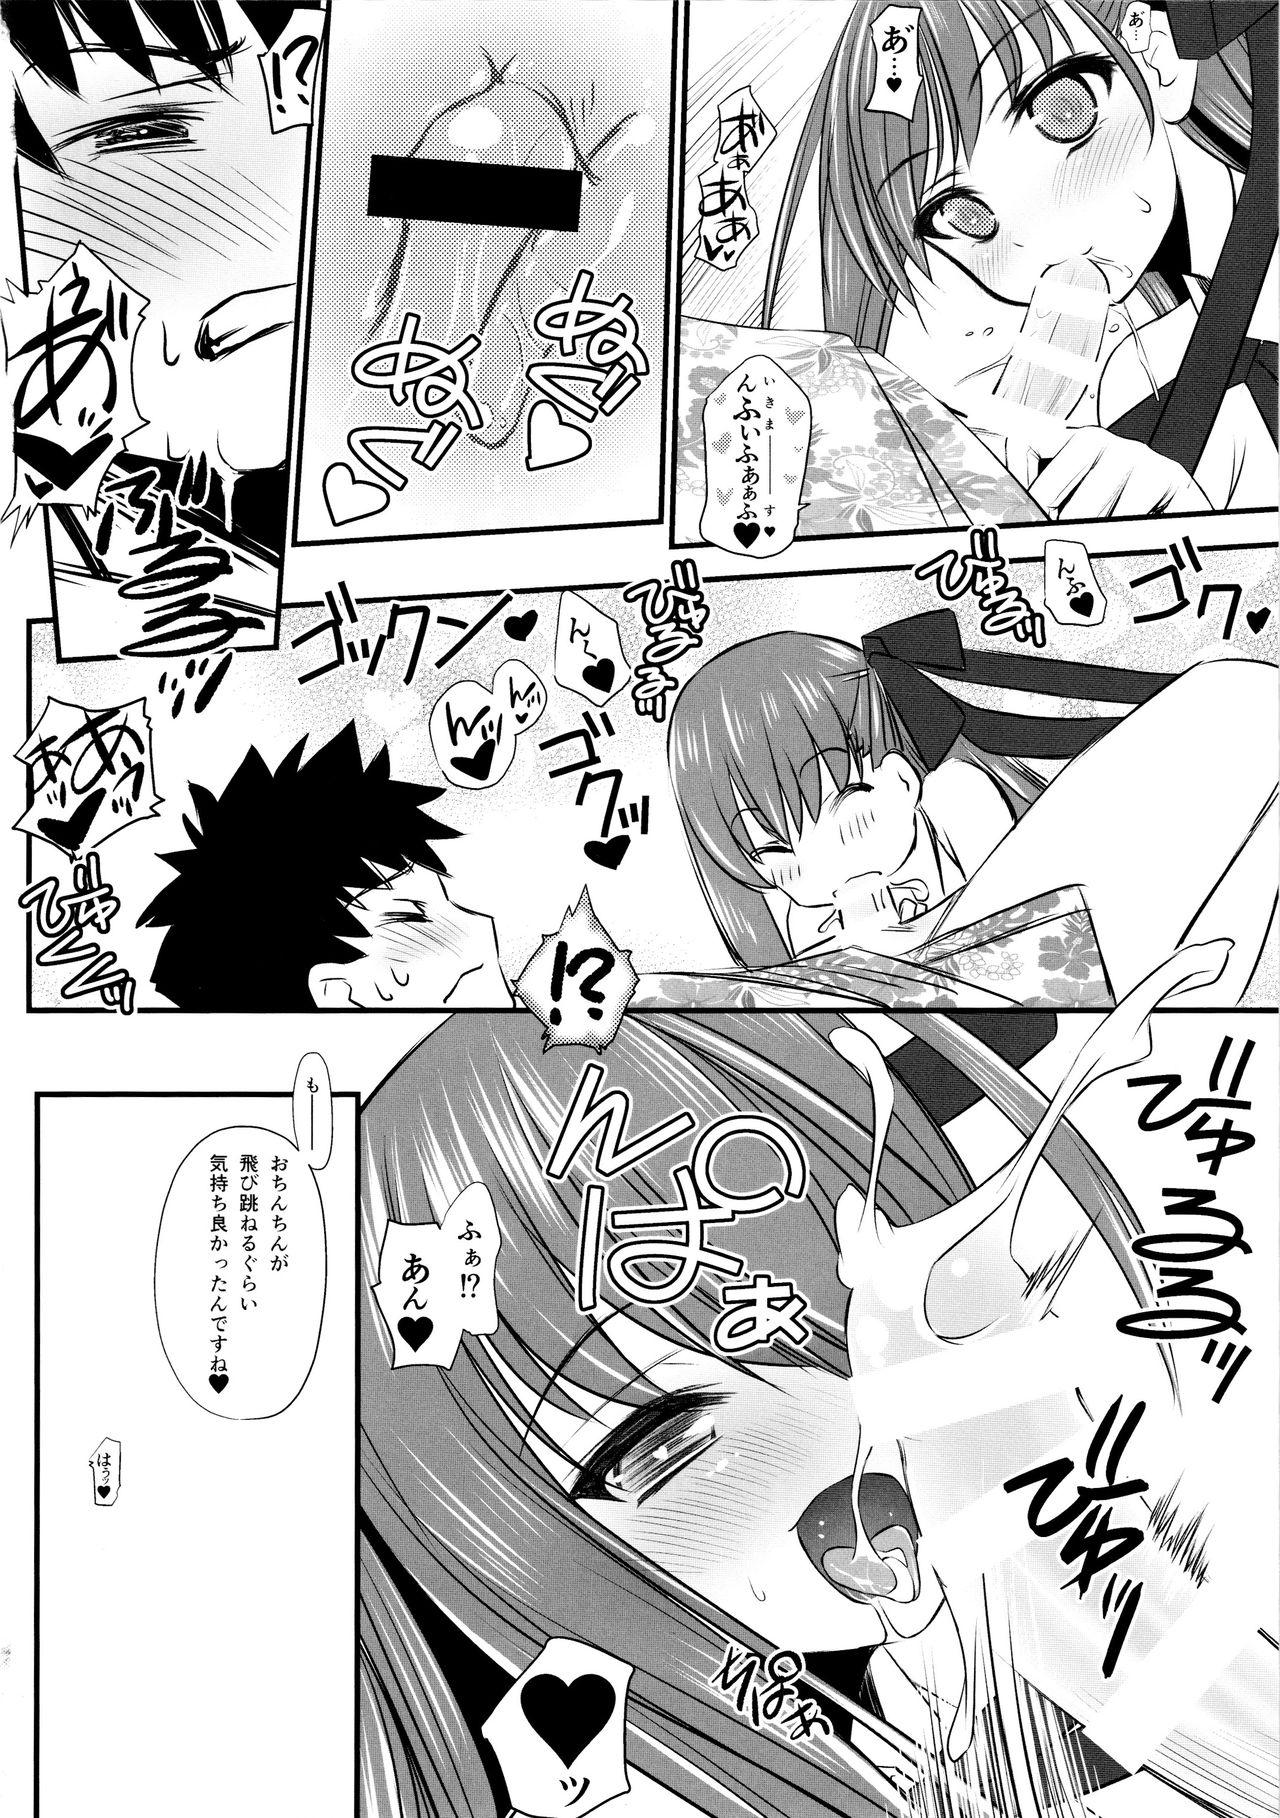 Dildo Fucking (C96) [Yakan Honpo (Inoue Tommy)] Queen [Kyuuin] BB-chan (Fate/Grand Order) - Fate grand order Dirty Talk - Page 6